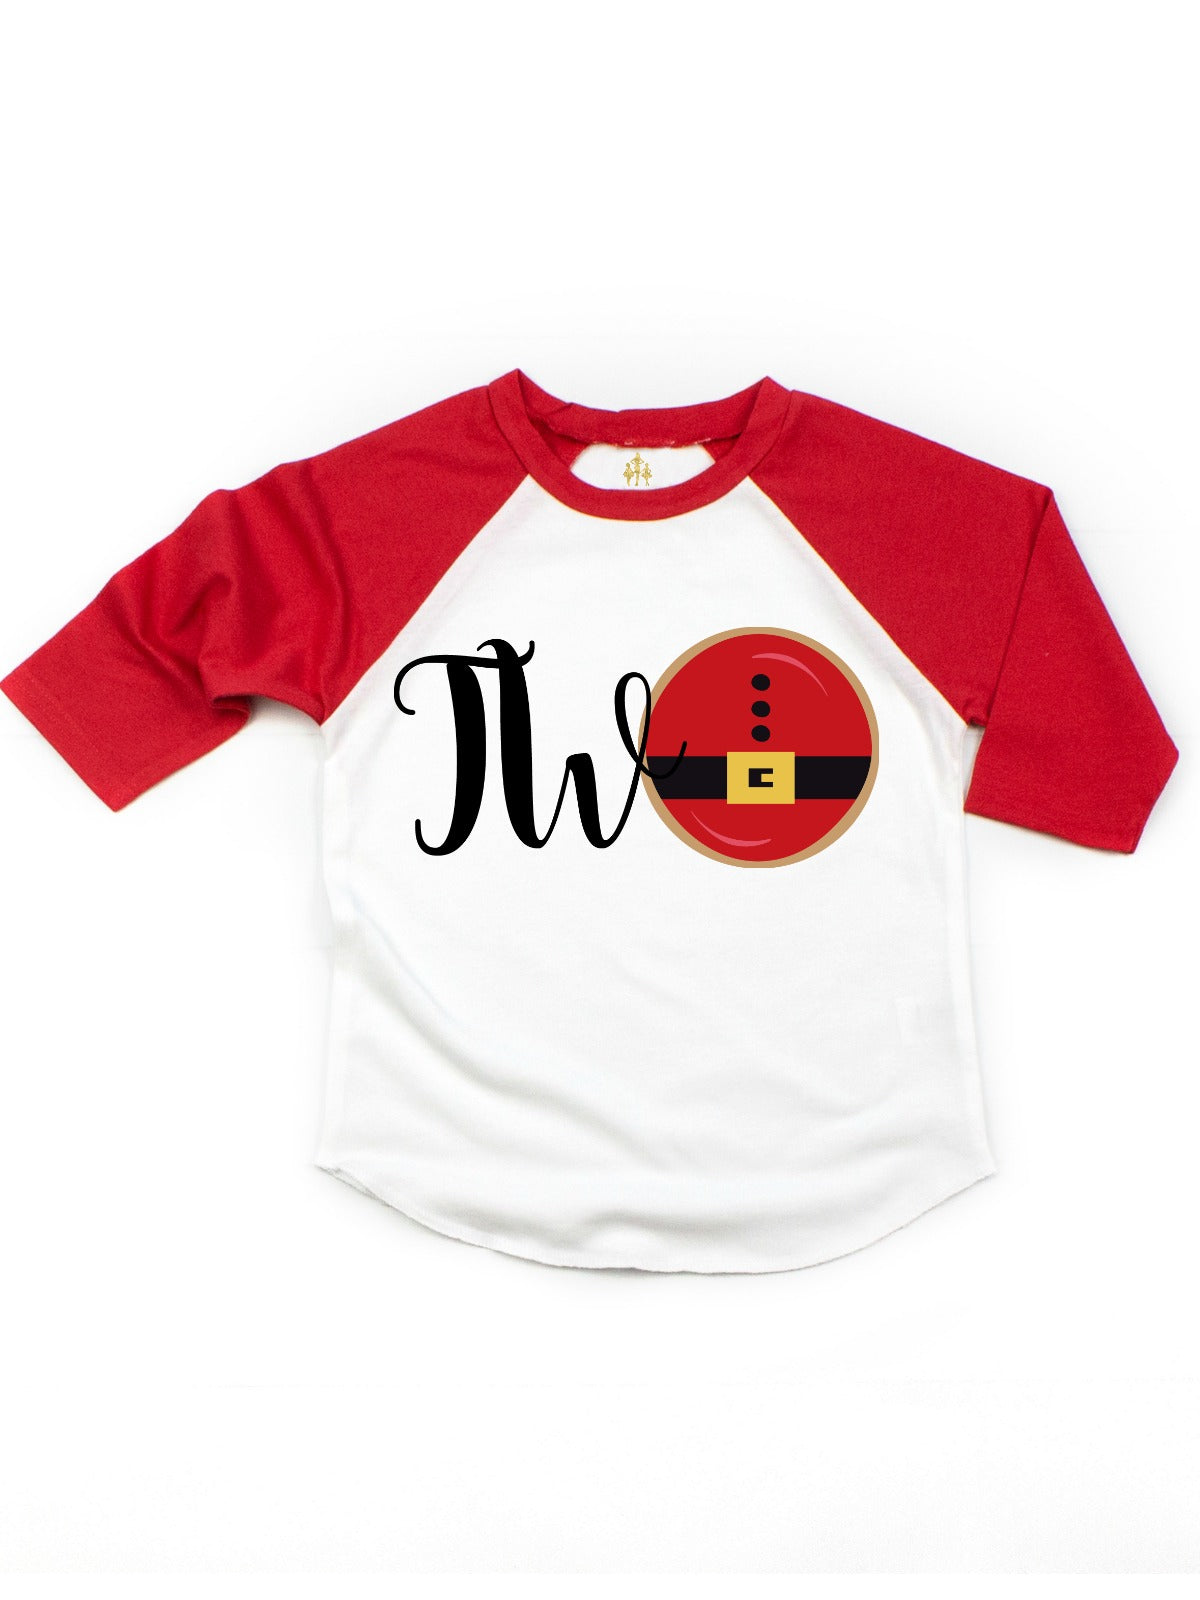 second birthday TWO santa belt outfit shirt